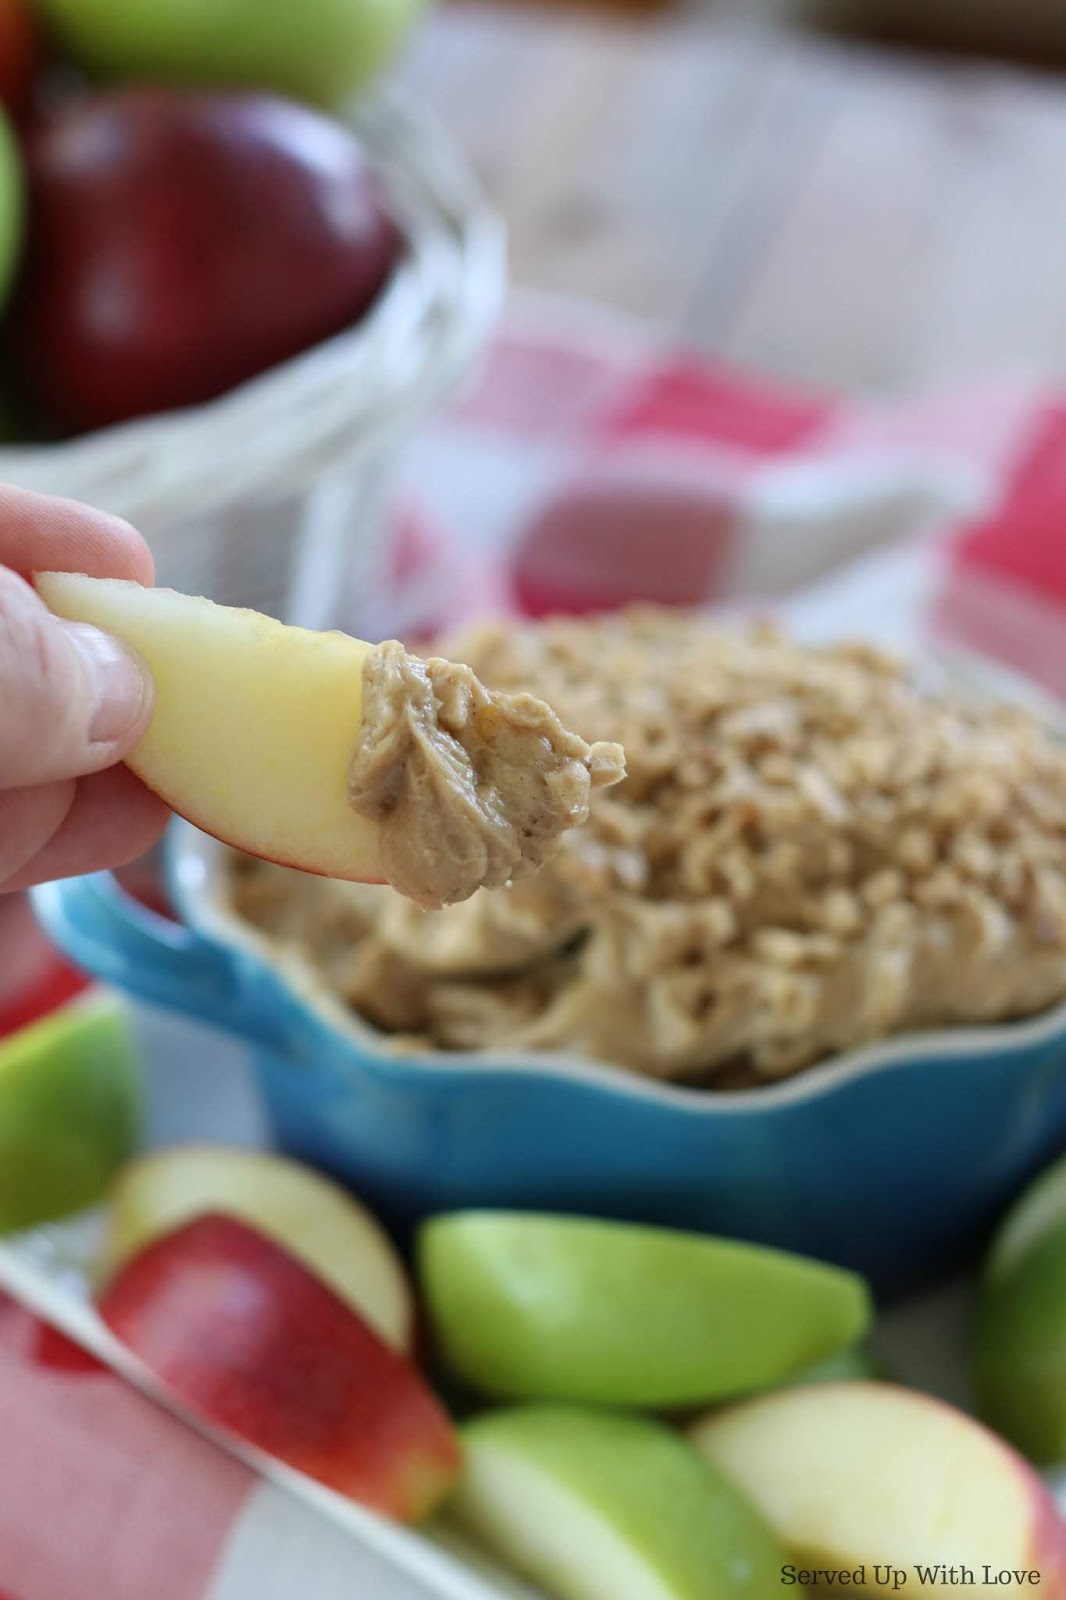 Served Up With Love: Toffee Apple Dip